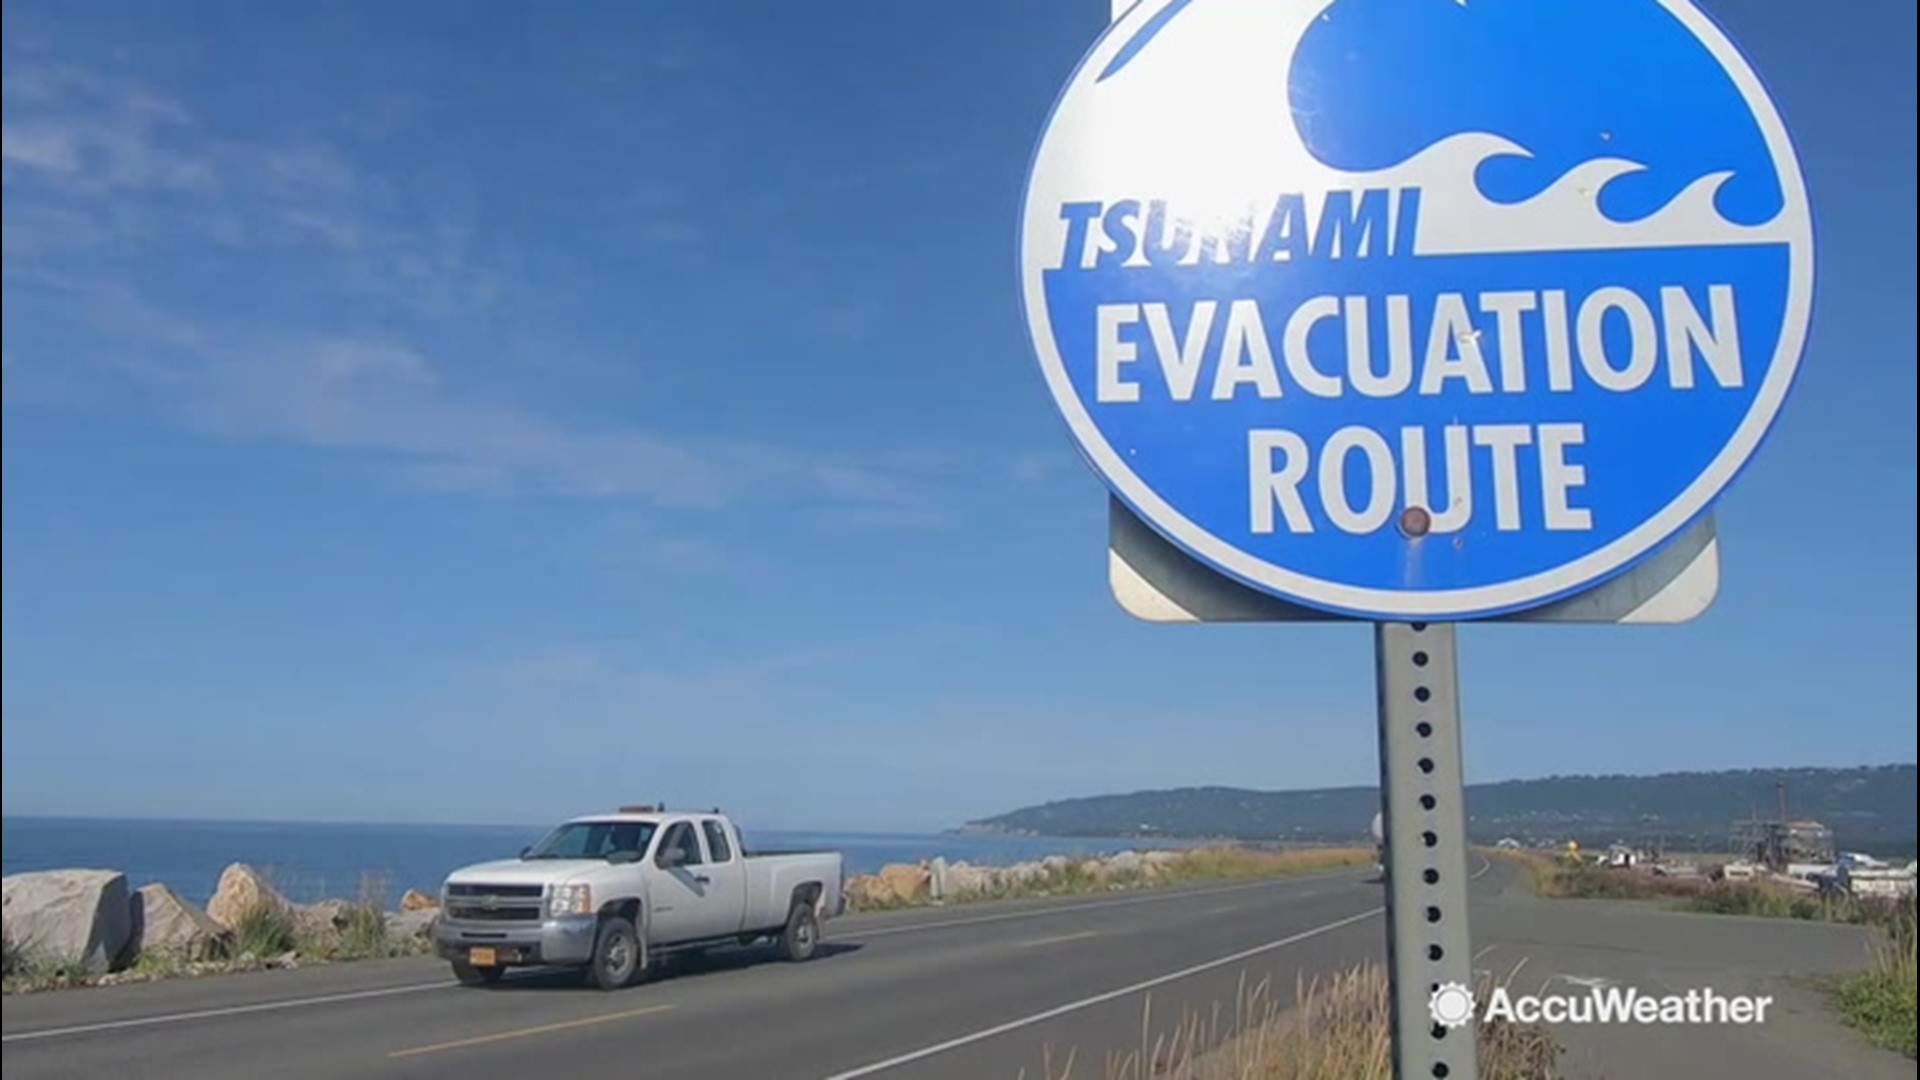 Major earthquakes are a real threat to the state of Alaska. Some of the towns that are the most susceptible to tsunamis are coming up with unique ways to keep preparedness in the minds of residents and visitors.